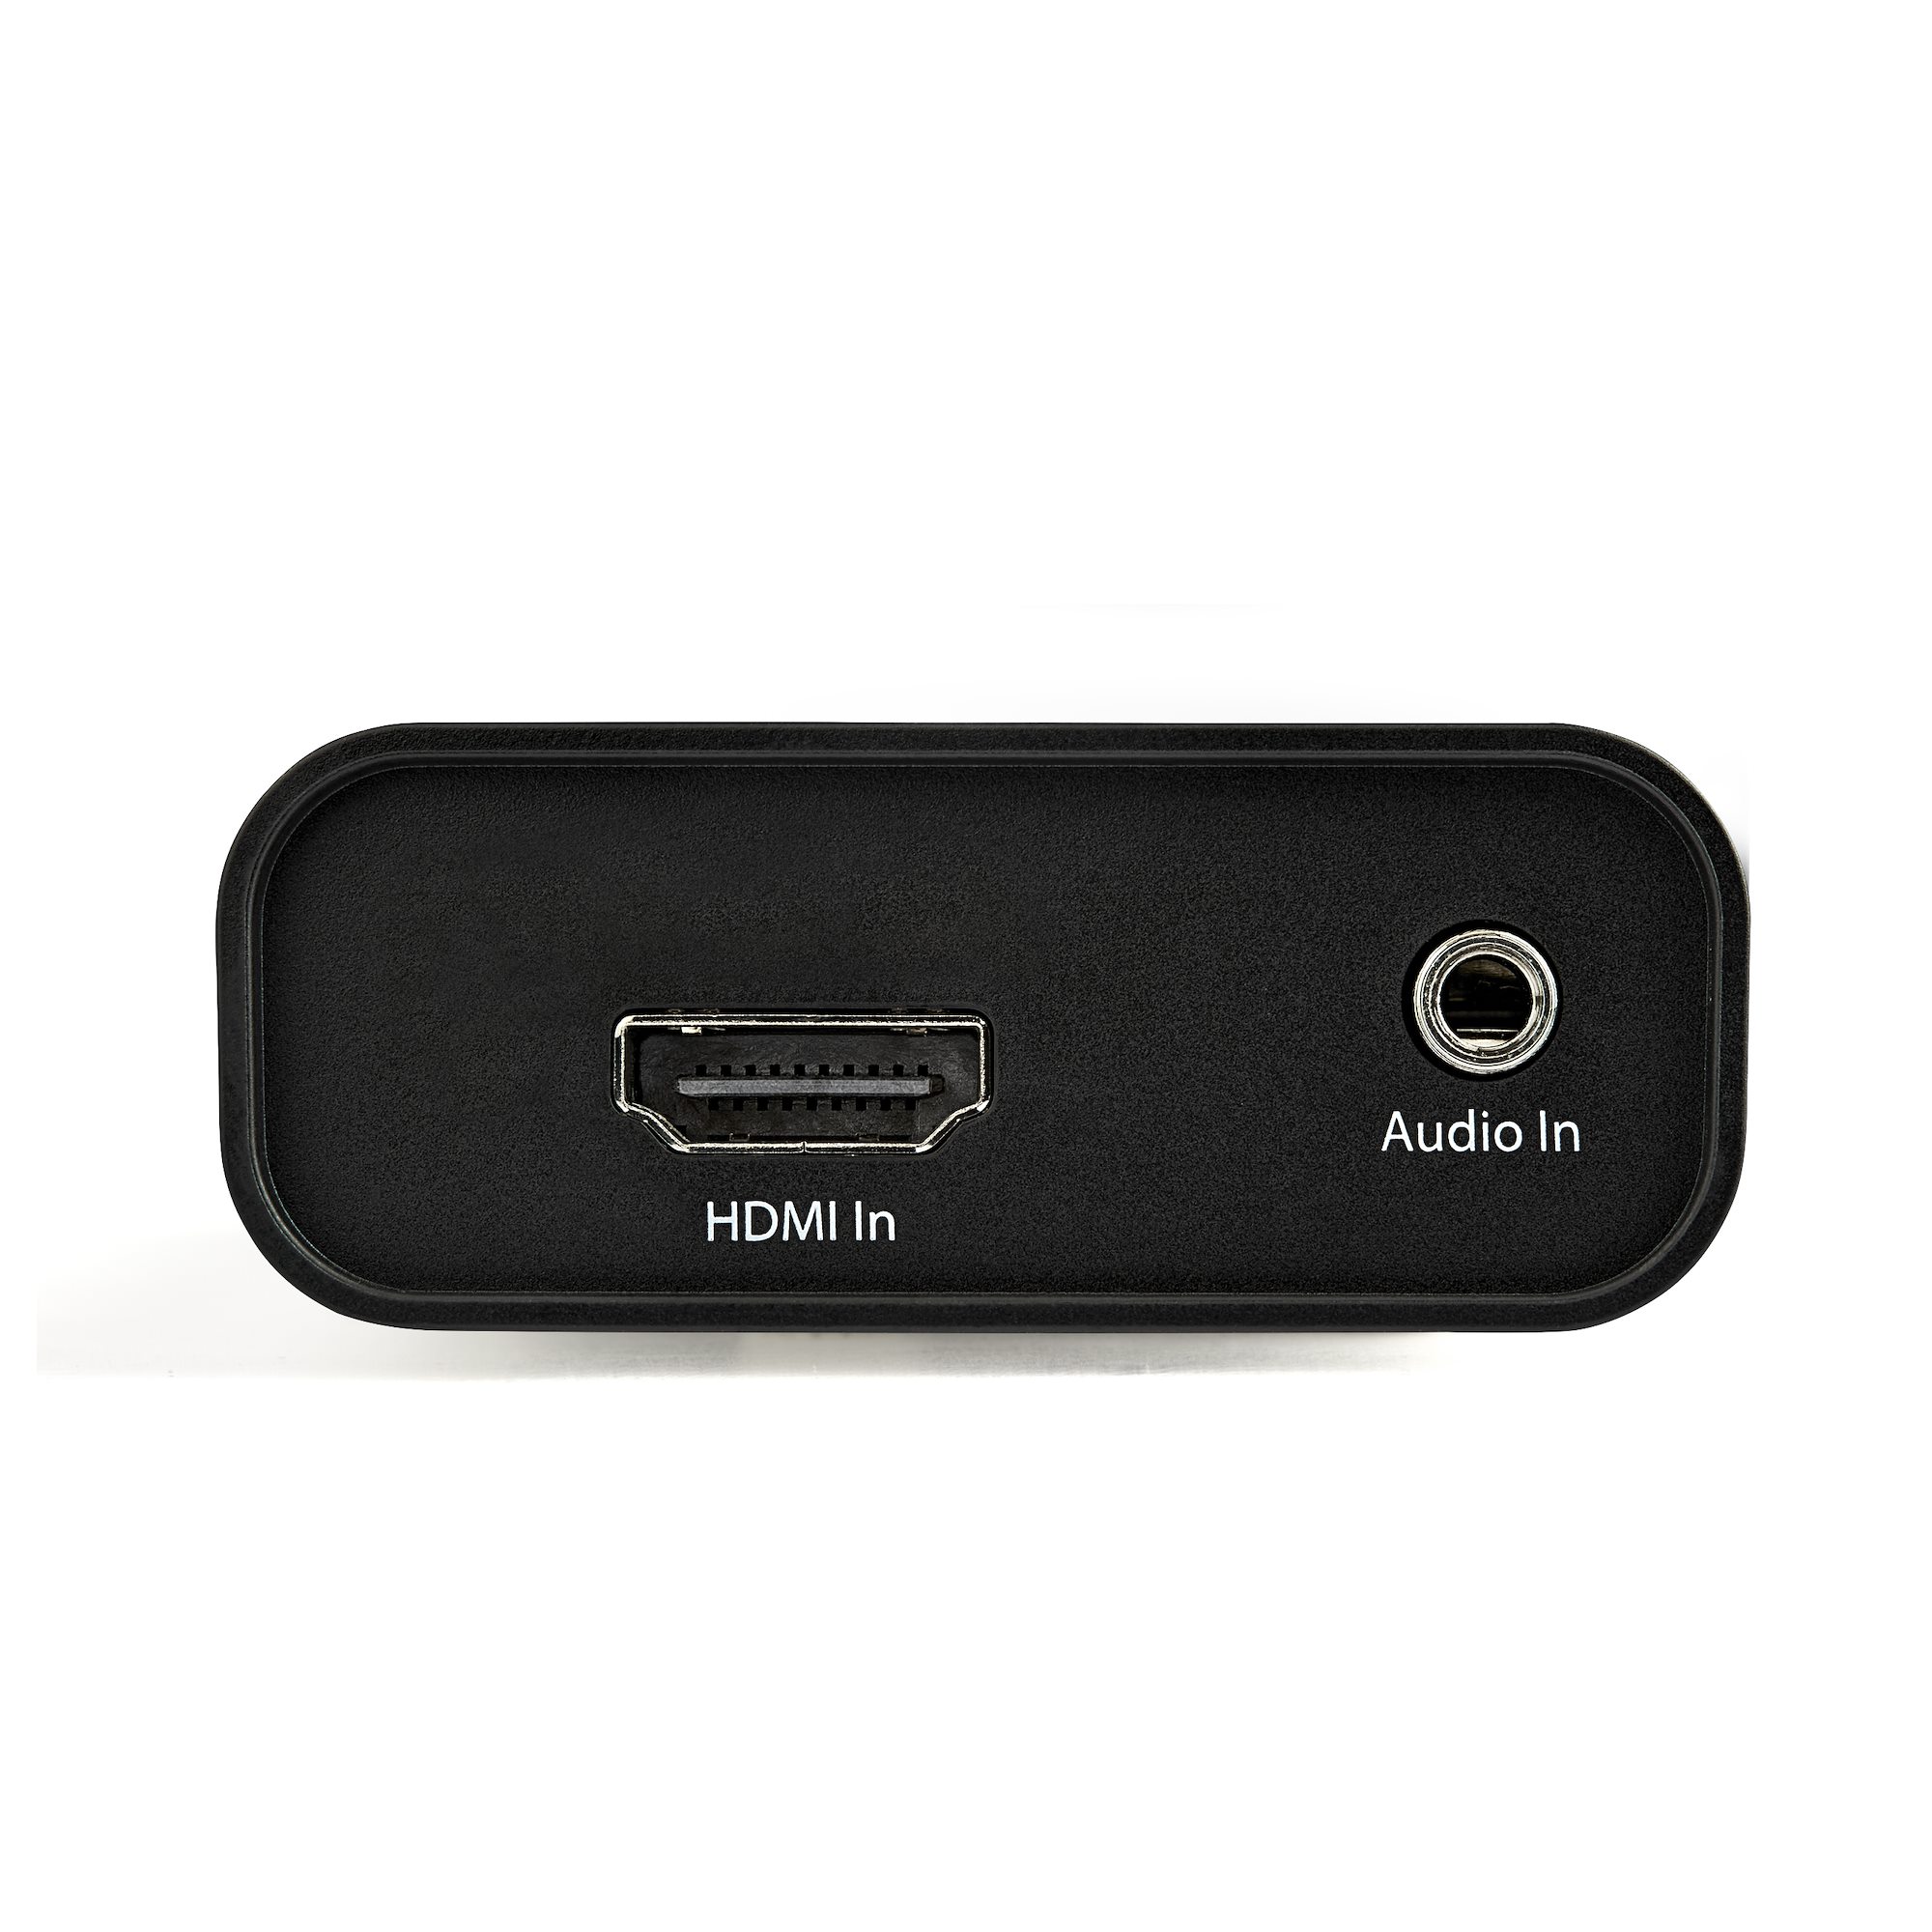 HDMI to USB C Video Capture Device 1080p 60fps - UVC - External USB 3.0  Type-C Capture/Live Streaming - HDMI Audio/Video Recorder Adapter - Works  with 